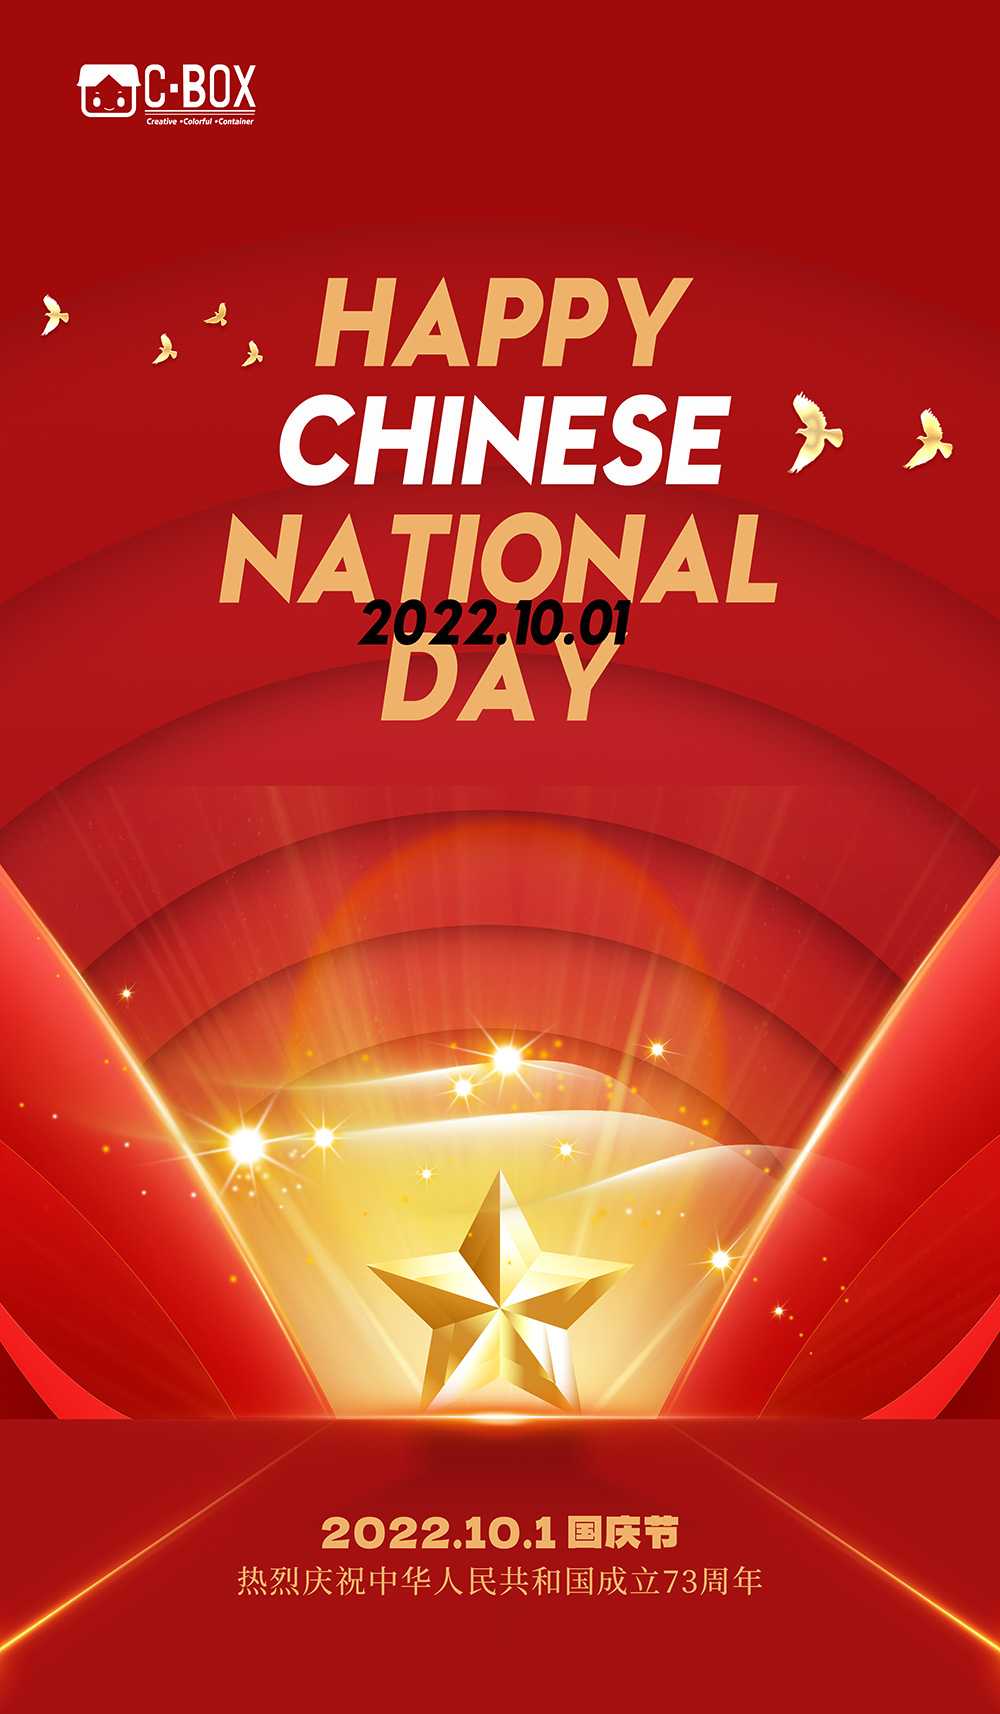 Happy National day！